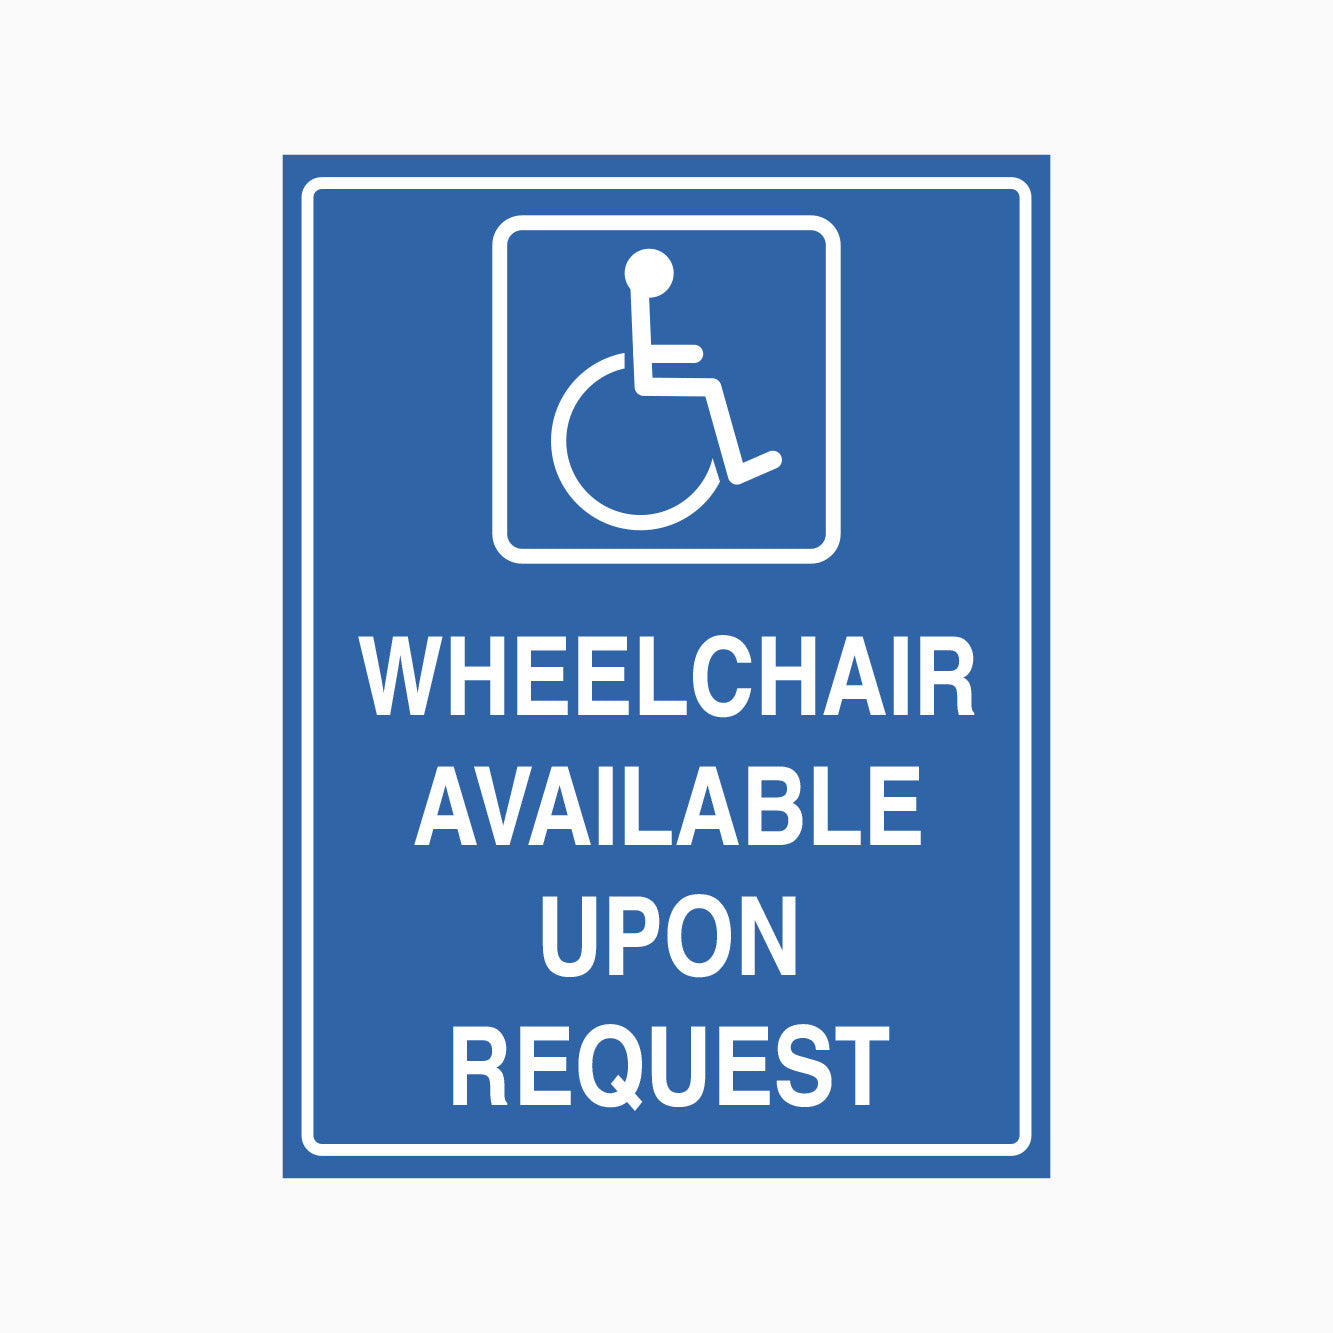 WHEELCHAIR AVAILABLE UPON REQUEST SIGN